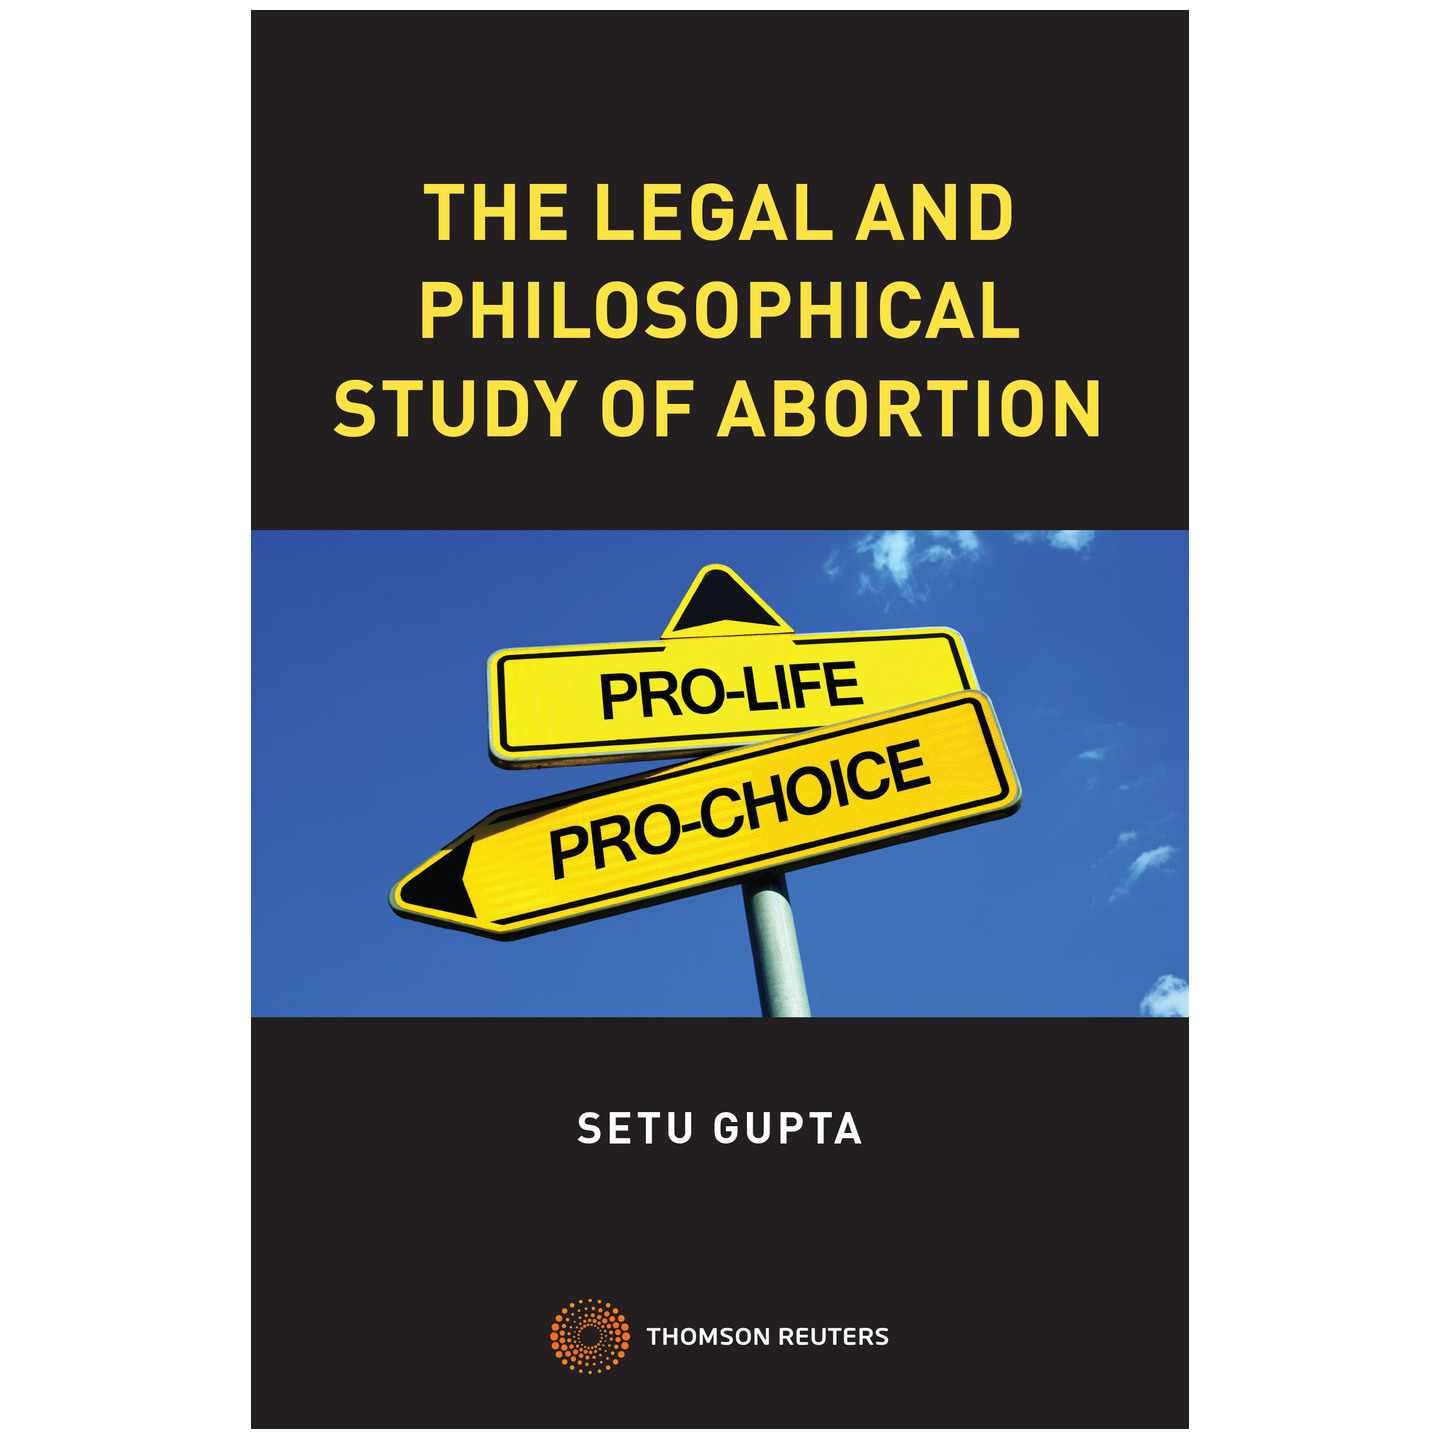 THE LEGAL AND PHILOSOPHICAL STUDY OF ABORTION